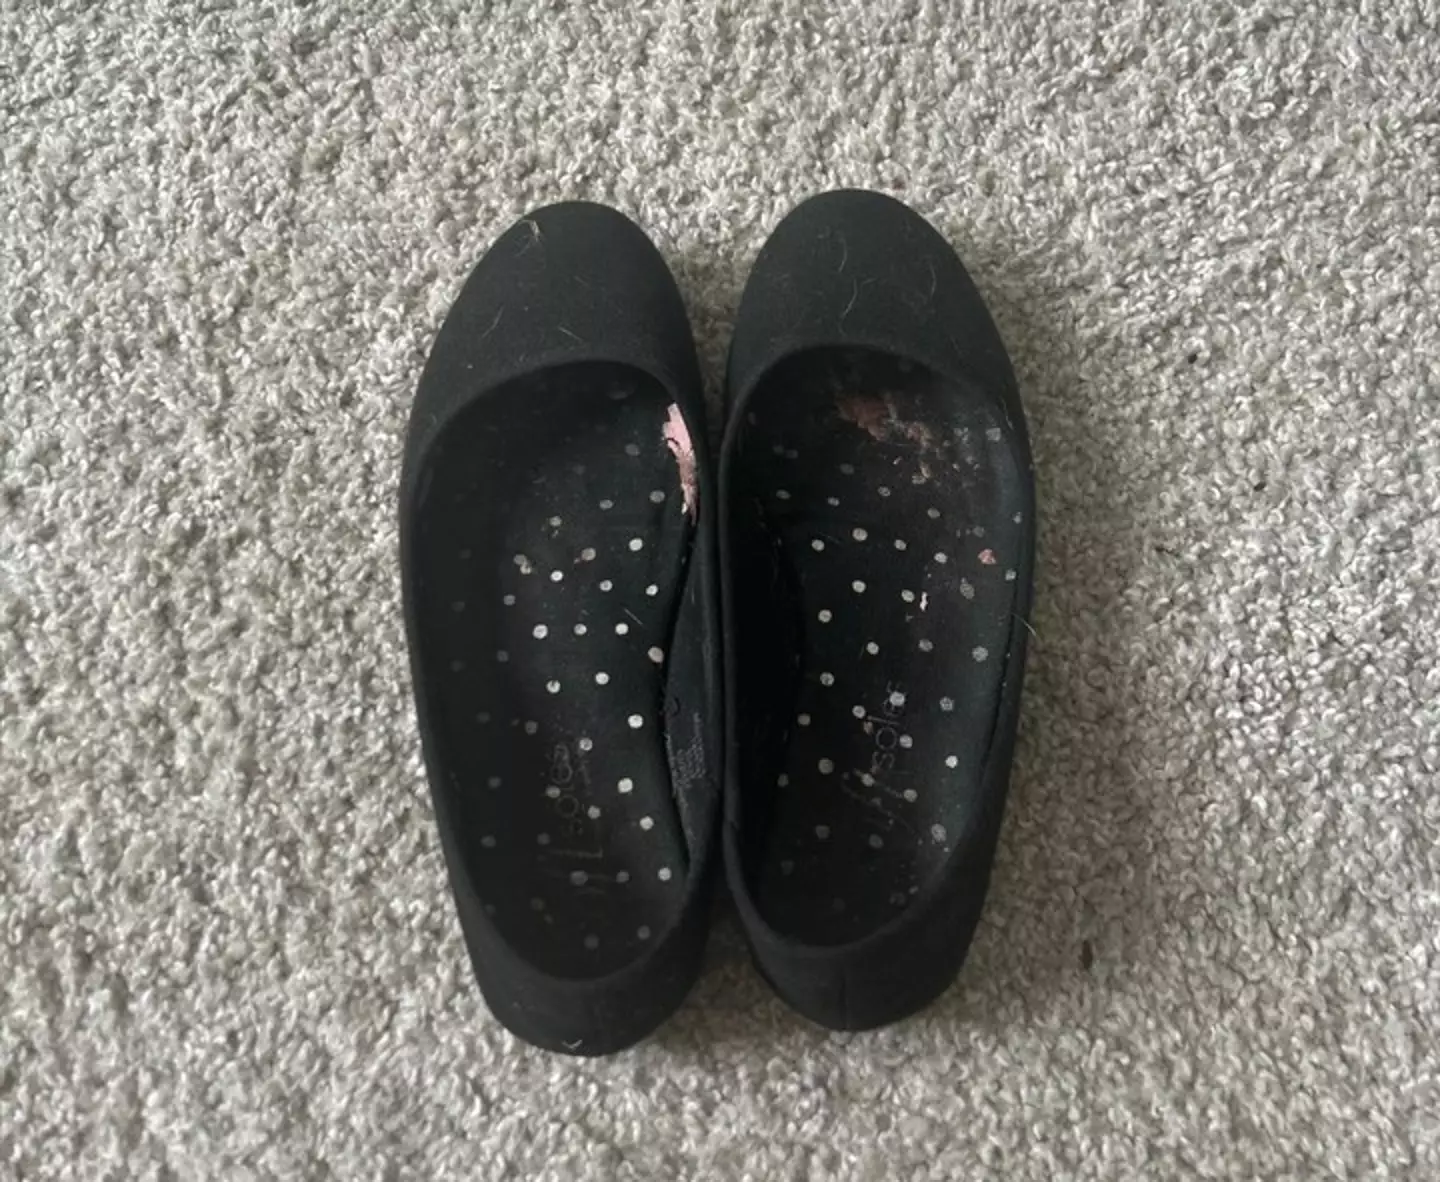 A 15-year-old girl's ballet pumps broke her school's uniform policy.